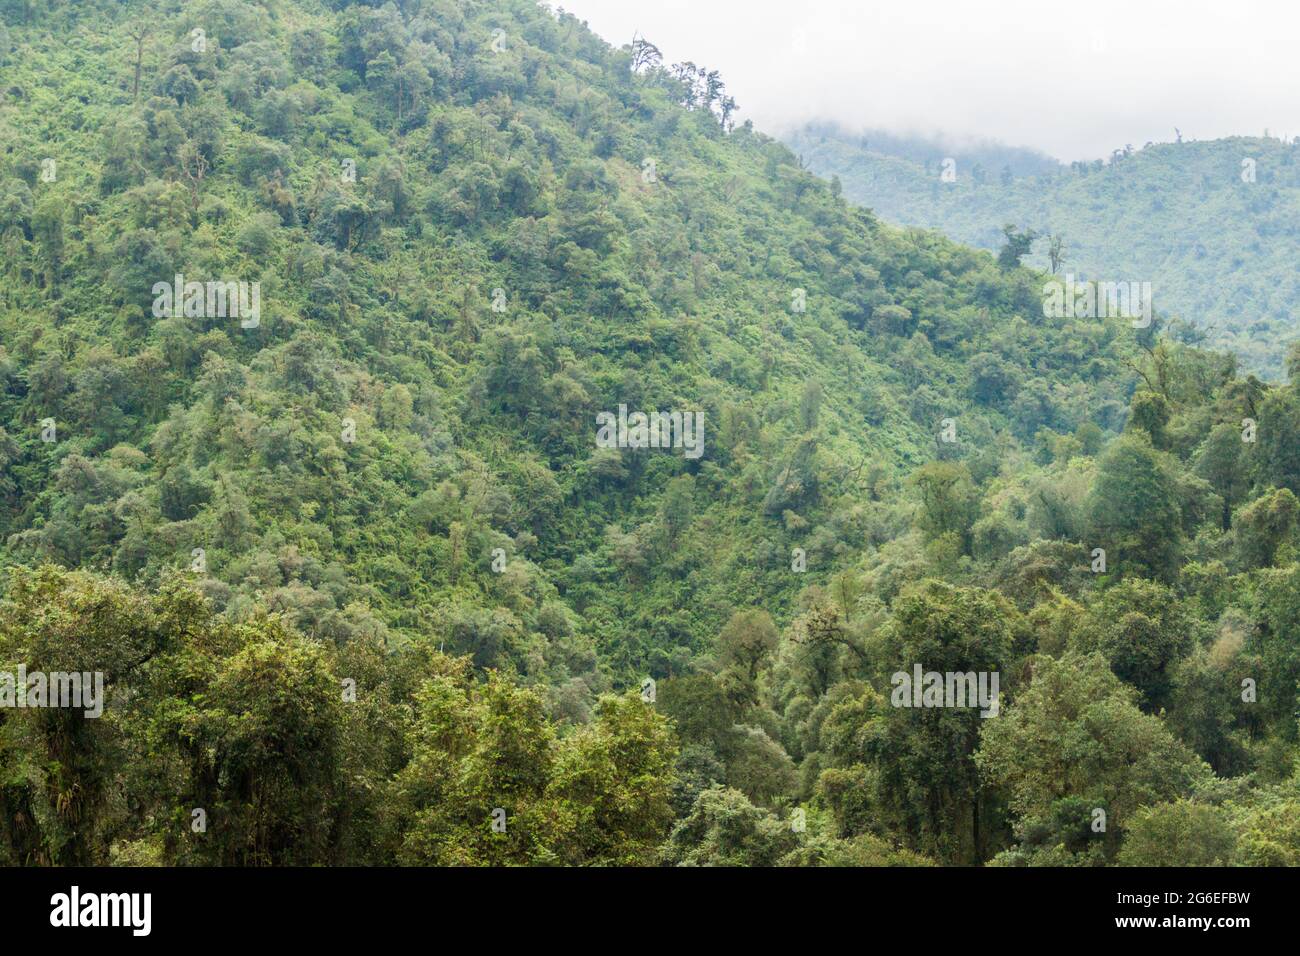 Mountains covered with a lush forest near San Miguel de Tucuman, Argentina Stock Photo